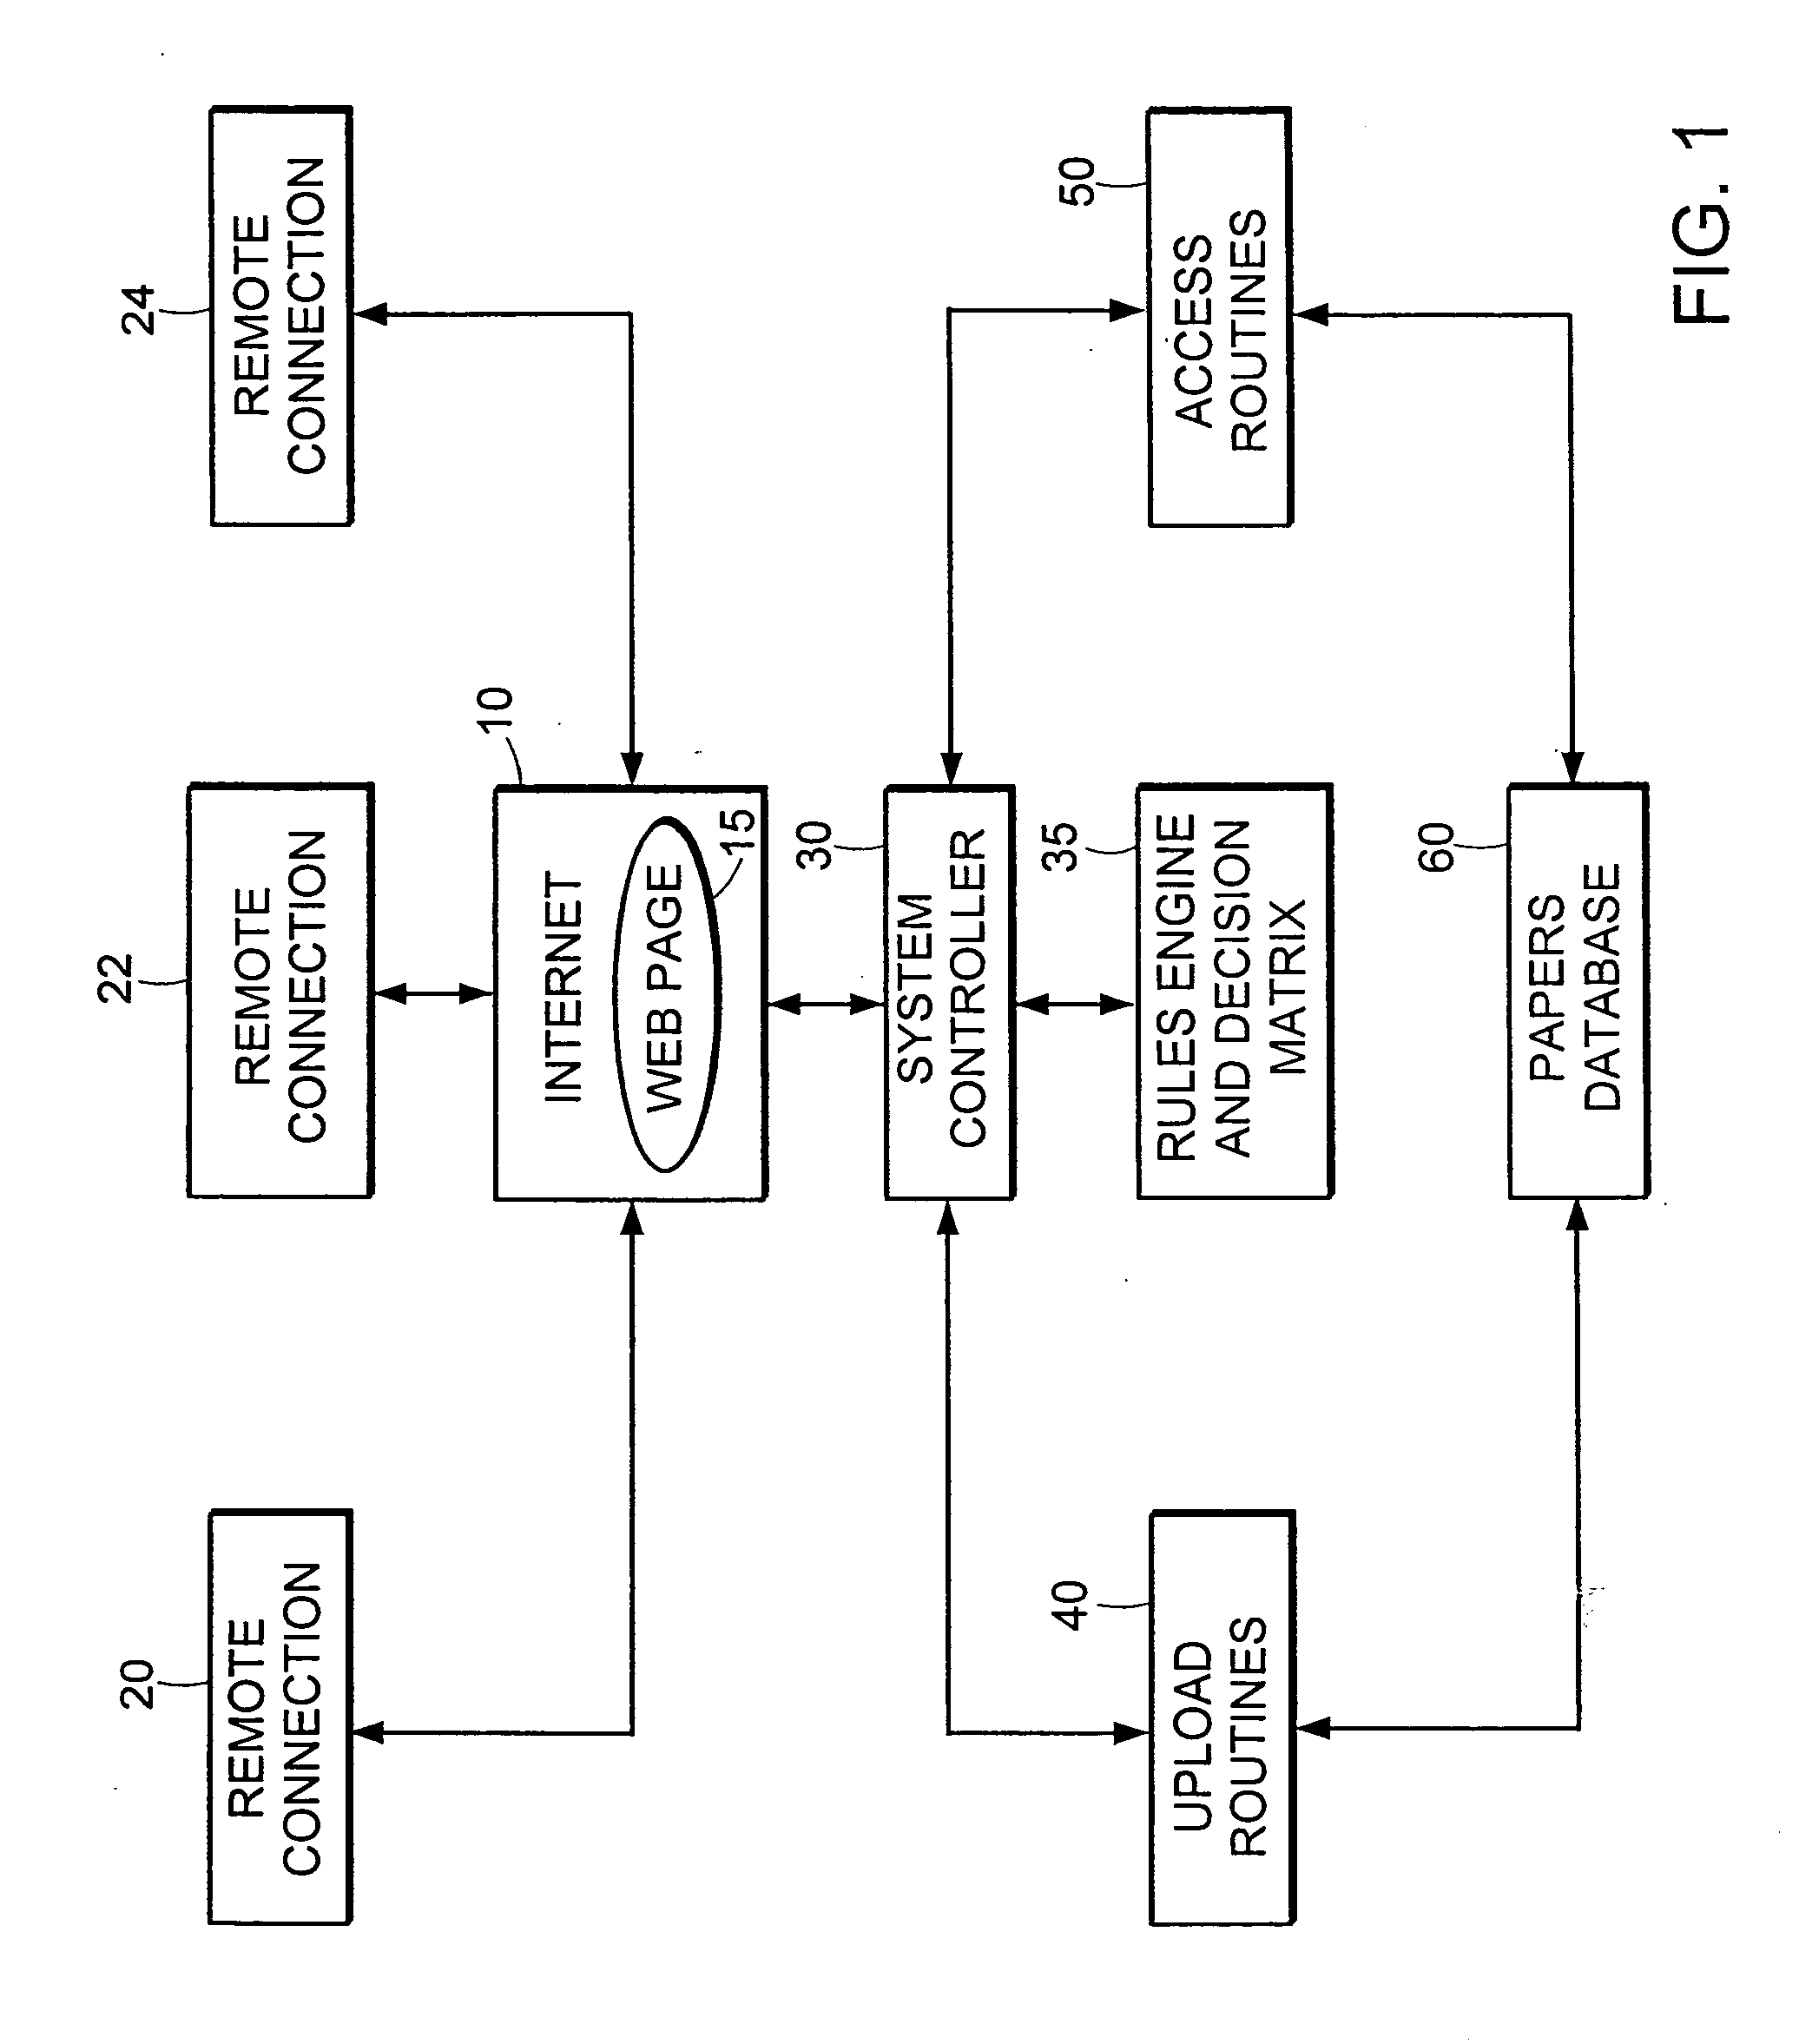 Electronic service of process system and method for carrying out service of court papers